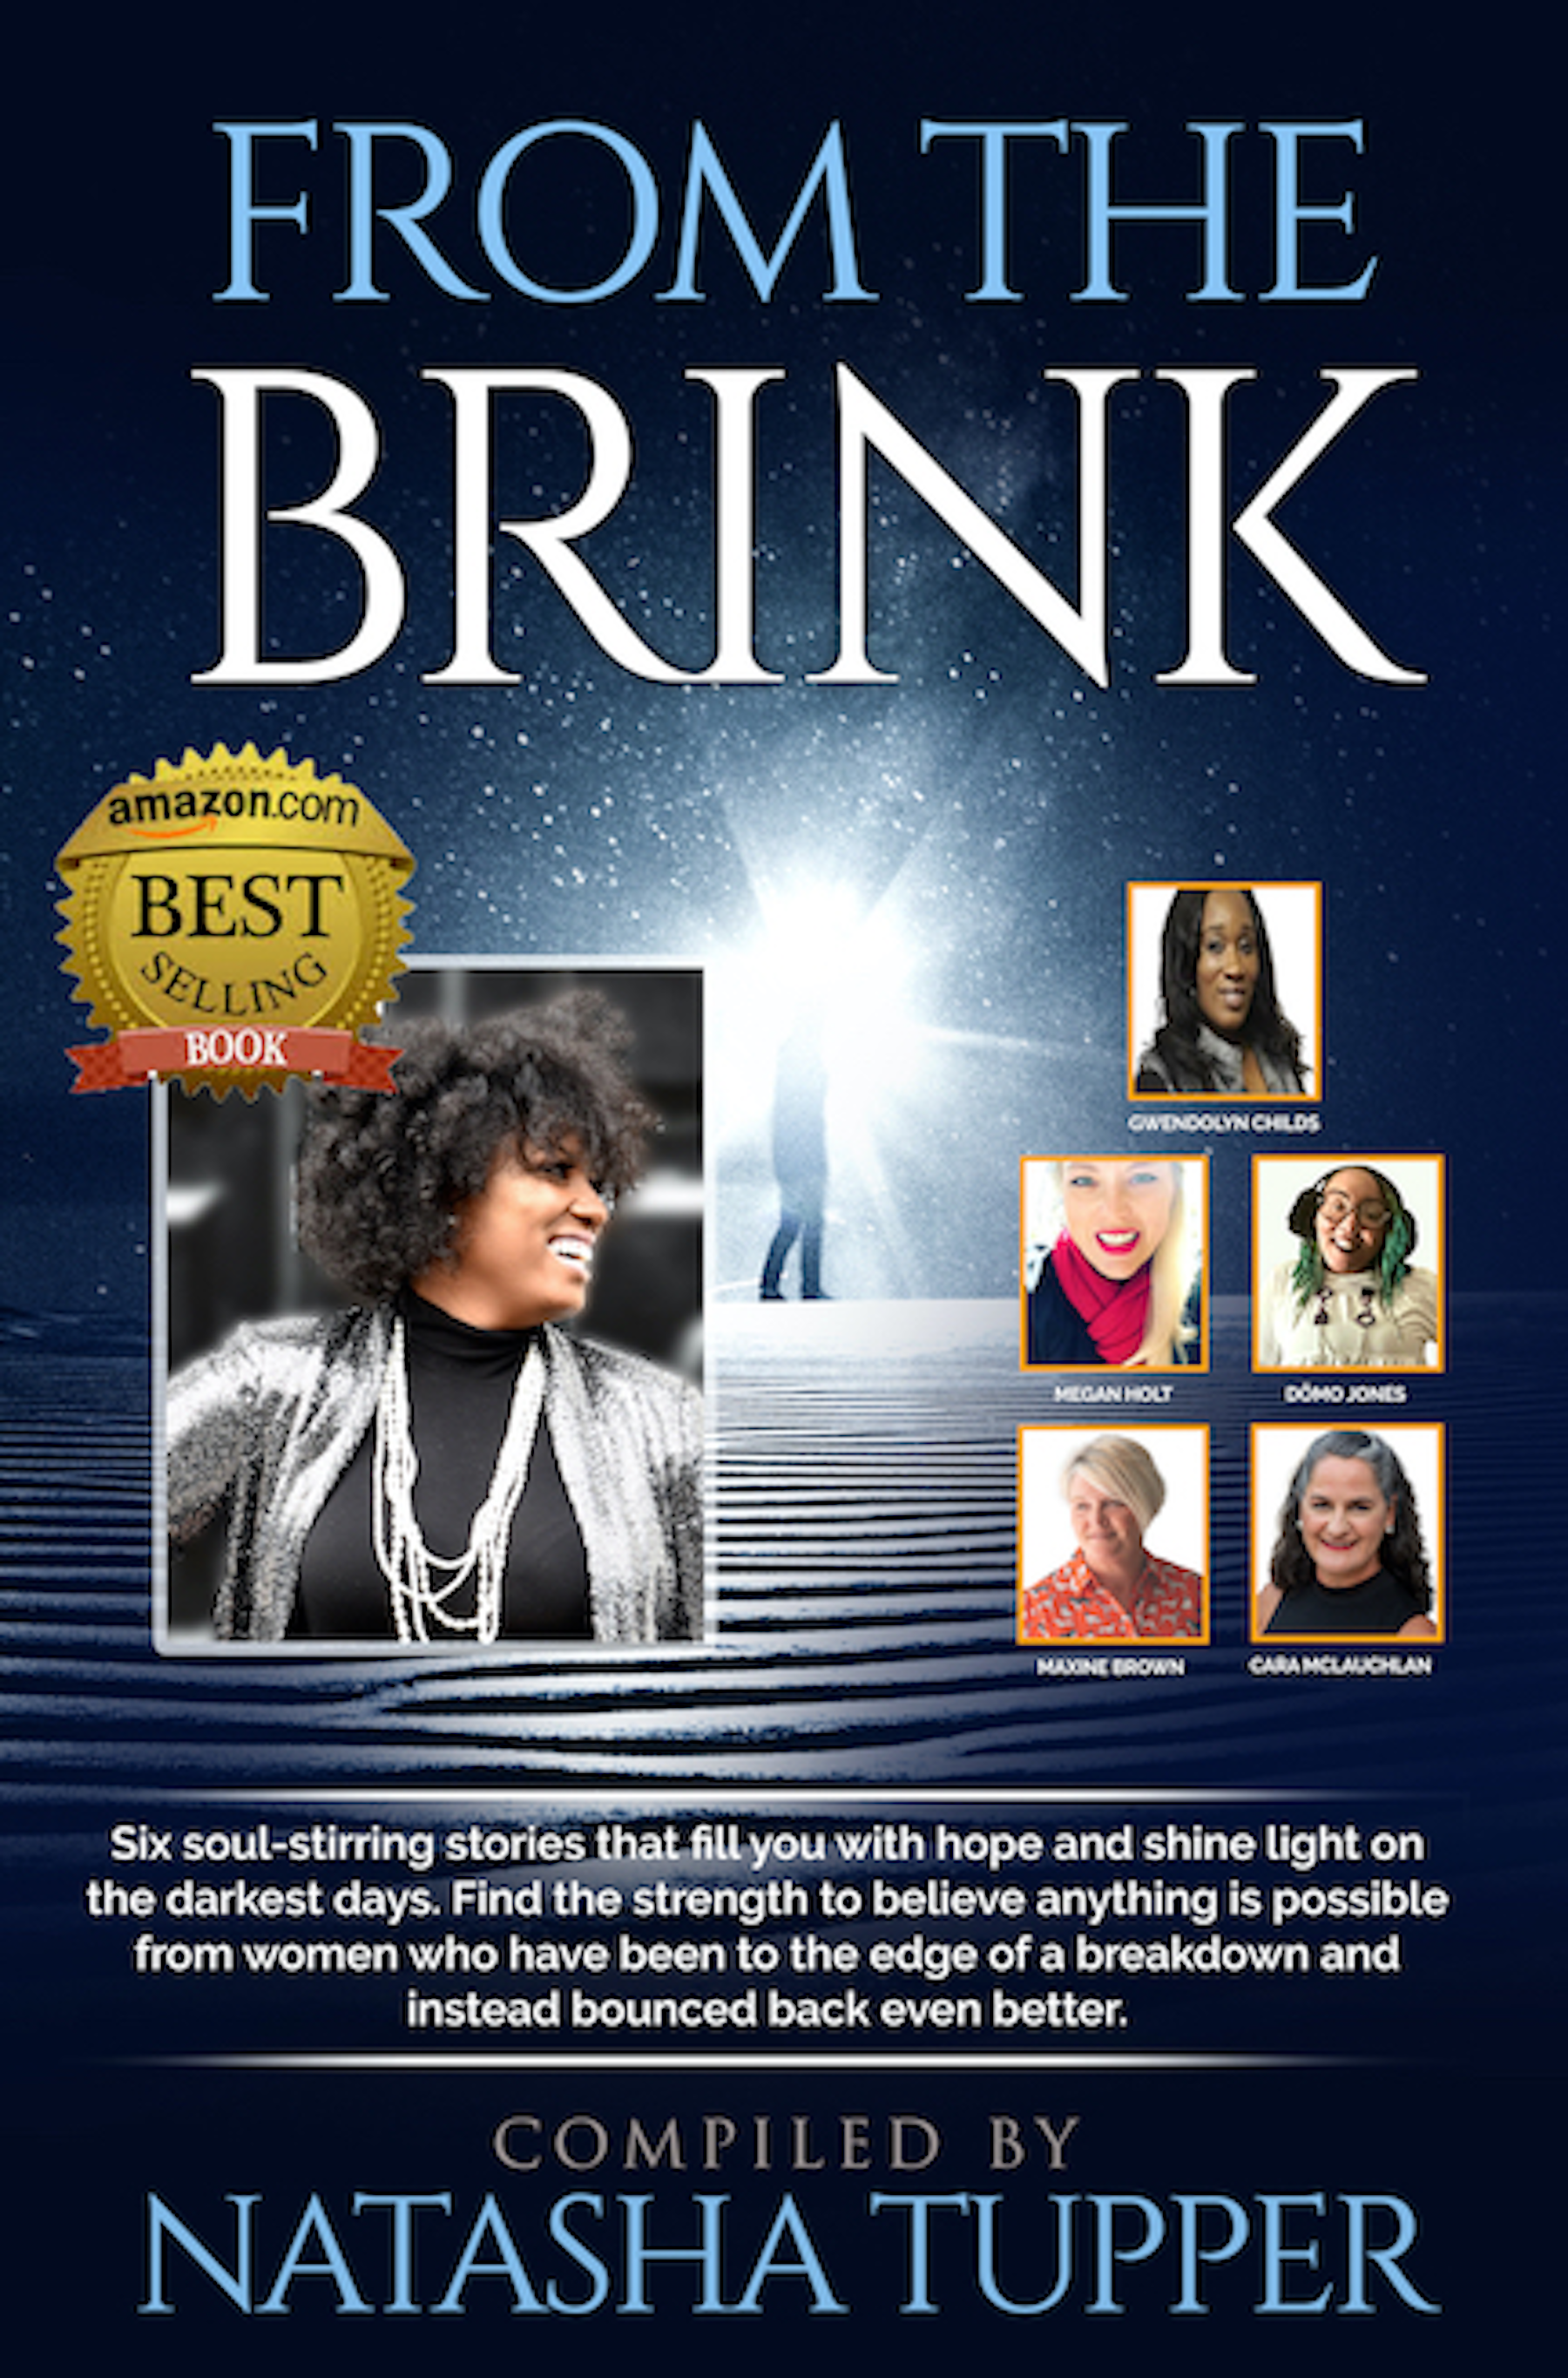 "From The Brink" Is A True Inspiration Full Of Transparency, Vulnerability And Victory